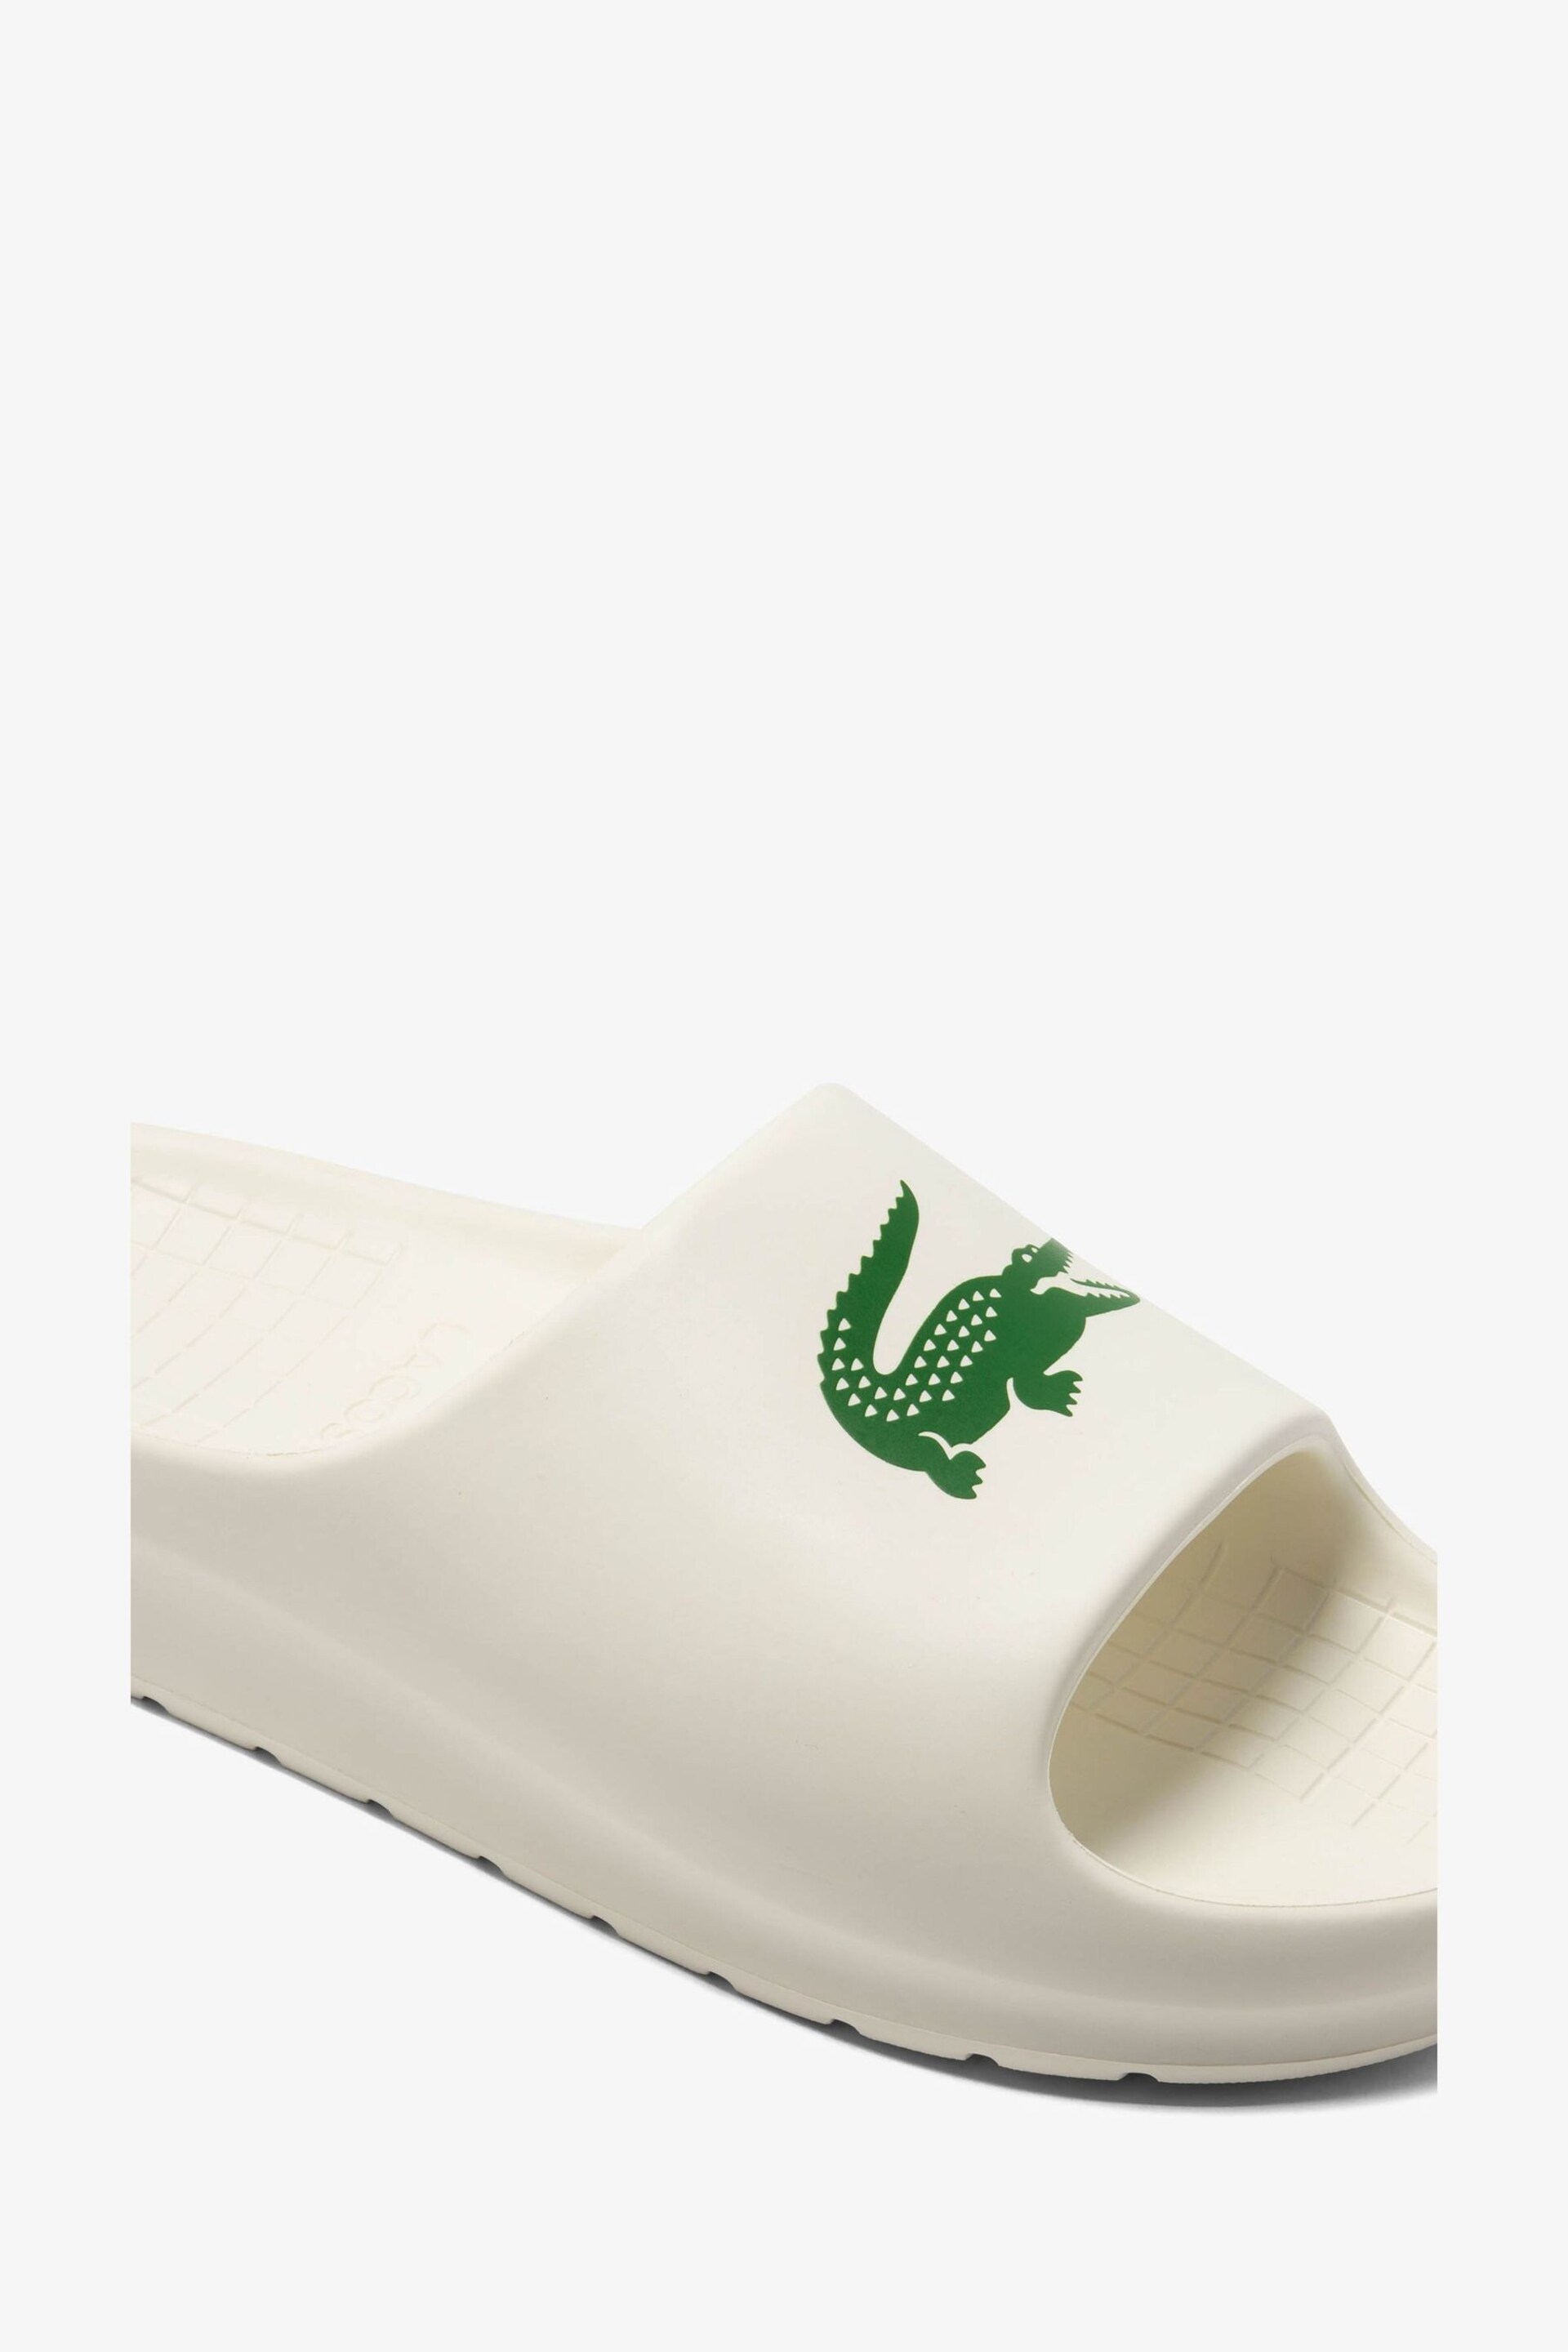 Lacoste Womens Serve Slide White Sandals - Image 8 of 8